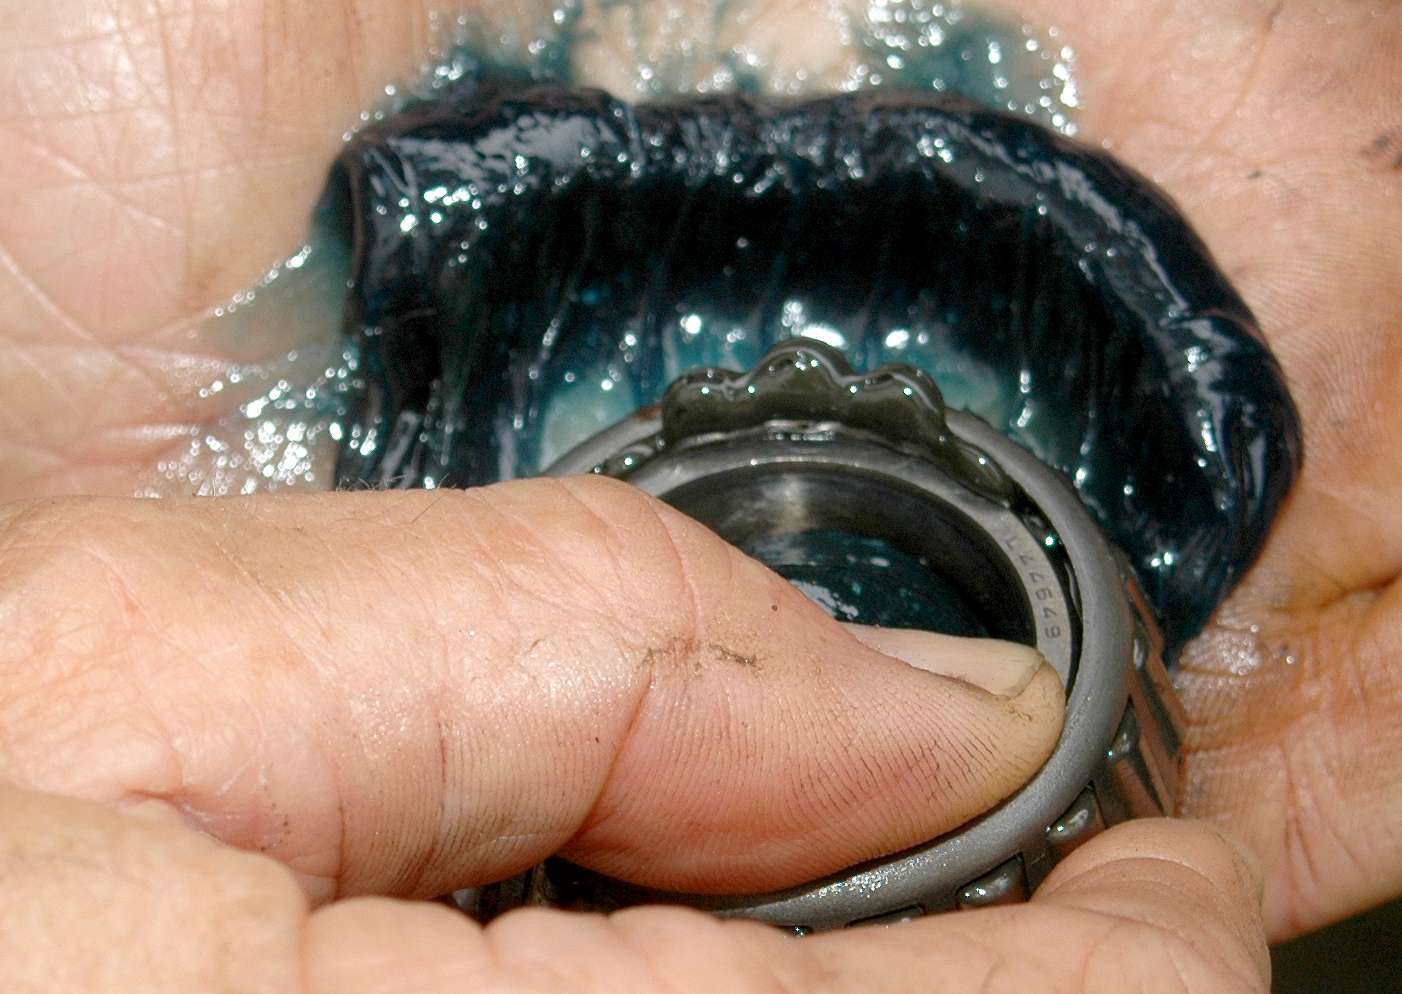 Repeatedly push the wide edge of the bearing through the edge of the grease and forcefully slide it across your palm. This will push new grease into the bearing and flush the old grease out. Wipe away the old grease, rotate the bearing and repeat until you come full circle.